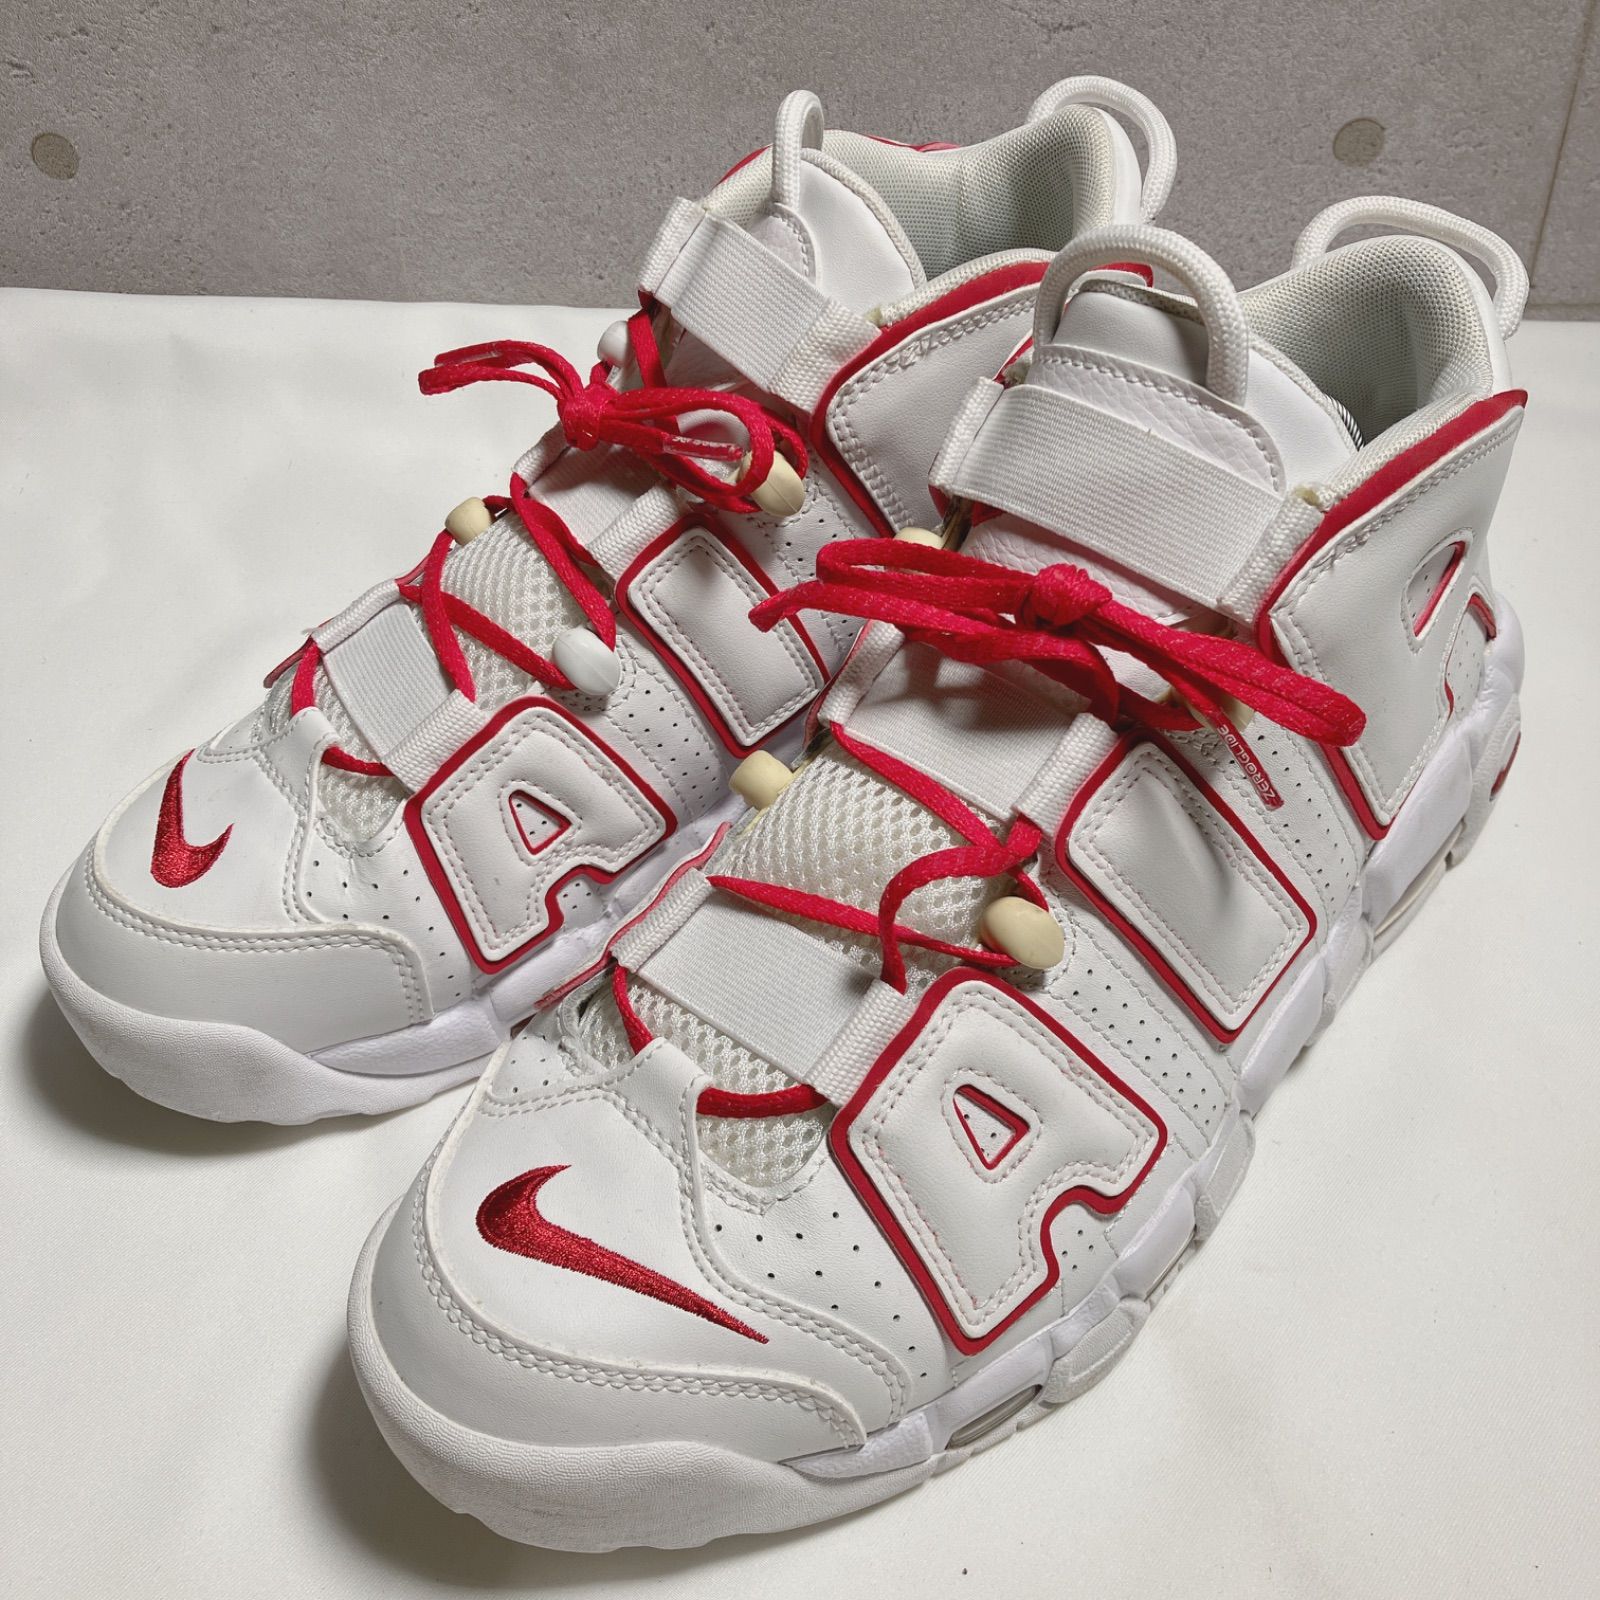 AirMoreUptempoNike Air More Uptempo Varsity Red モアテン